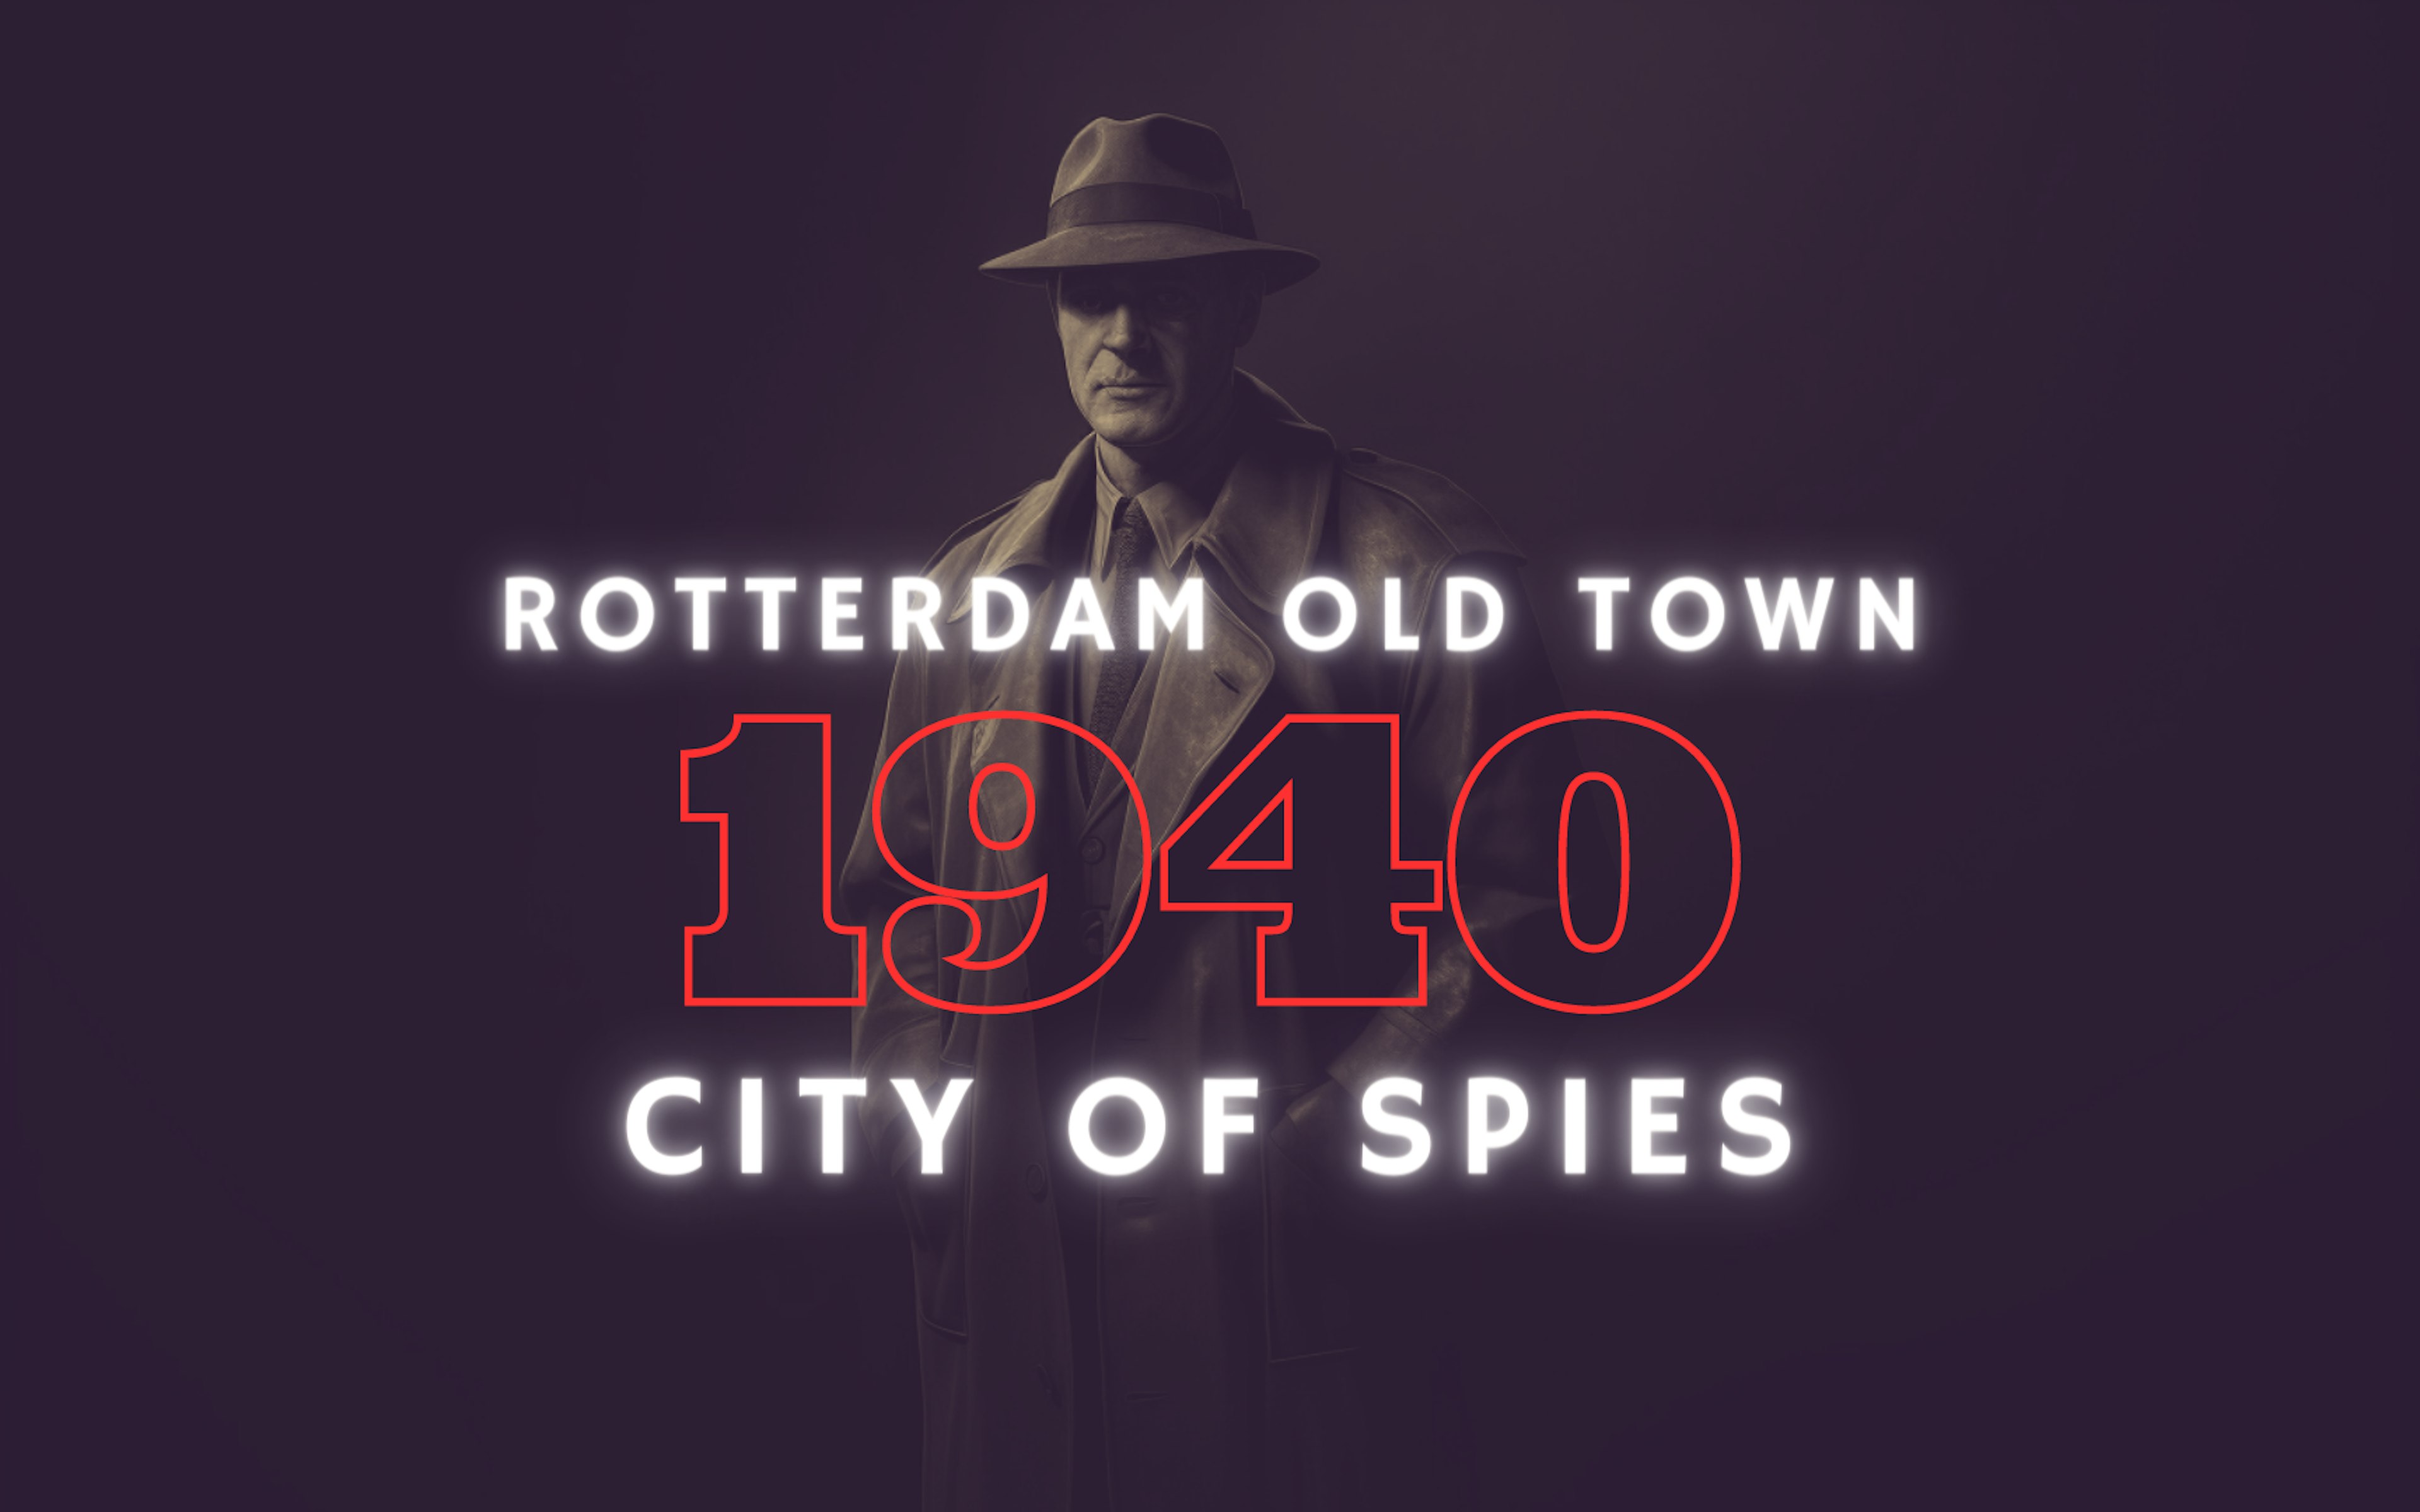 Rotterdam Old Town: City of Spies